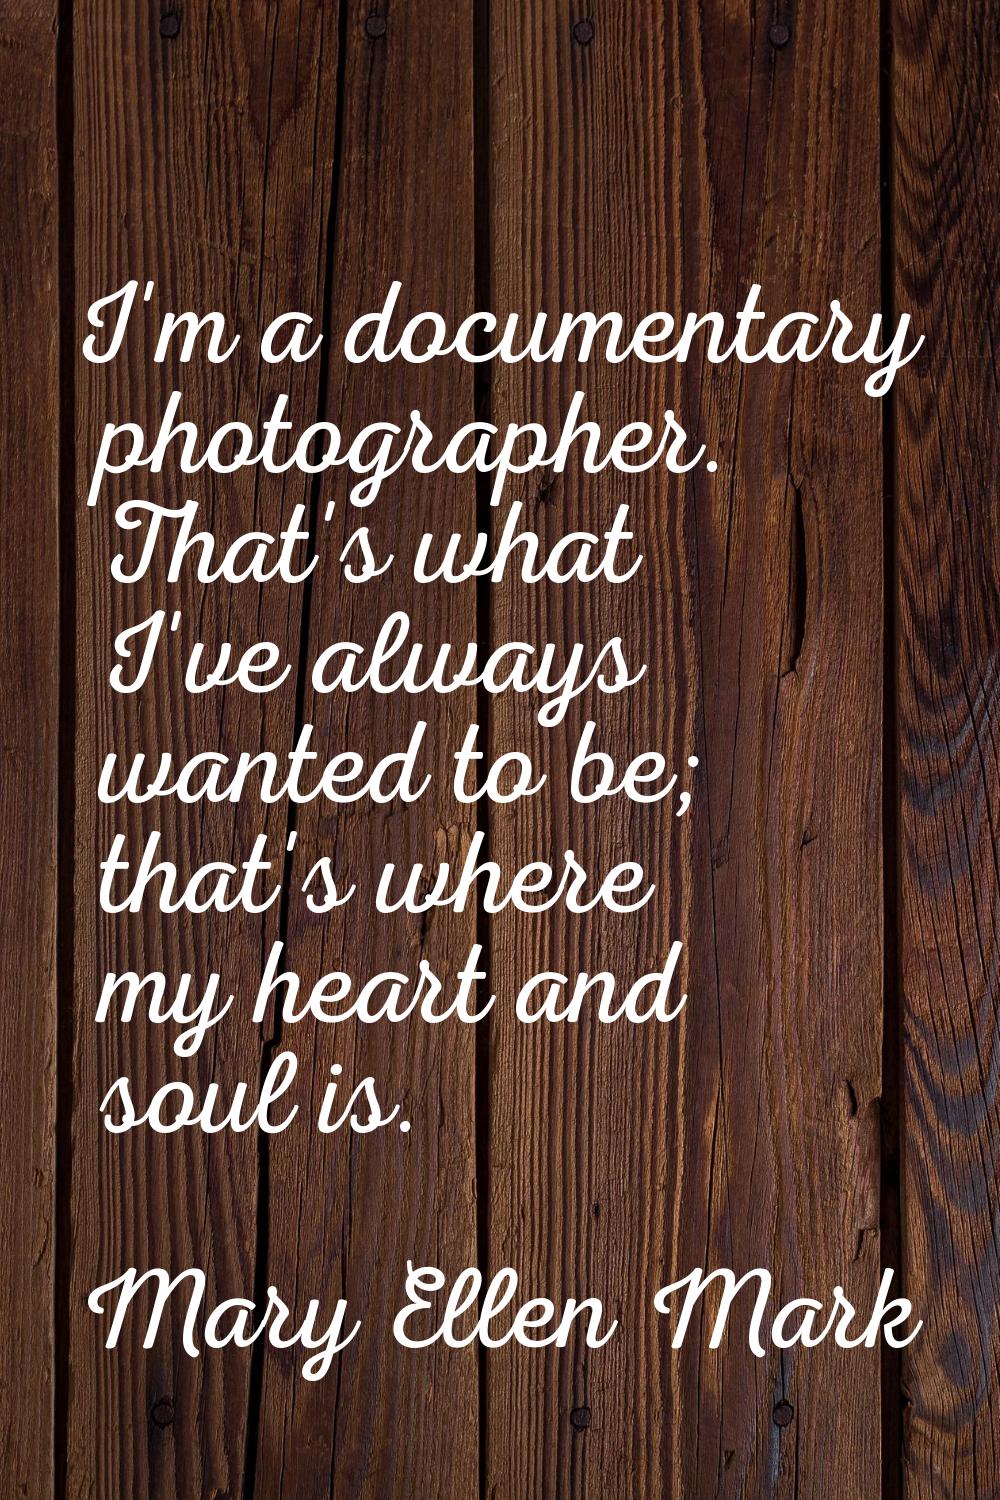 I'm a documentary photographer. That's what I've always wanted to be; that's where my heart and sou